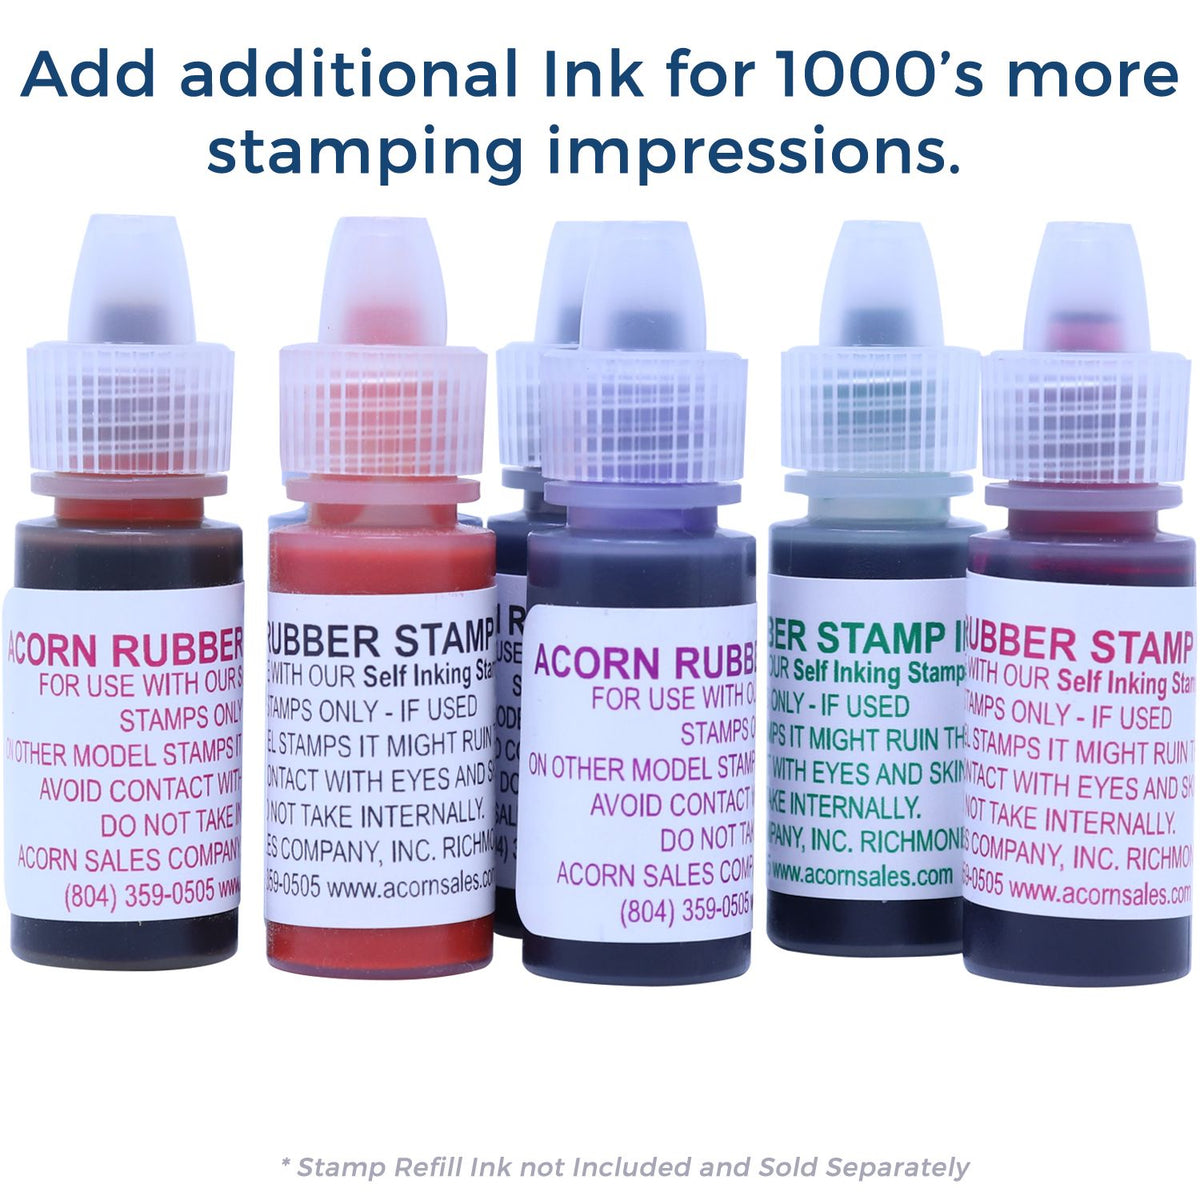 Refill Ink for Self-Inking Round Sad Face Stamp Available